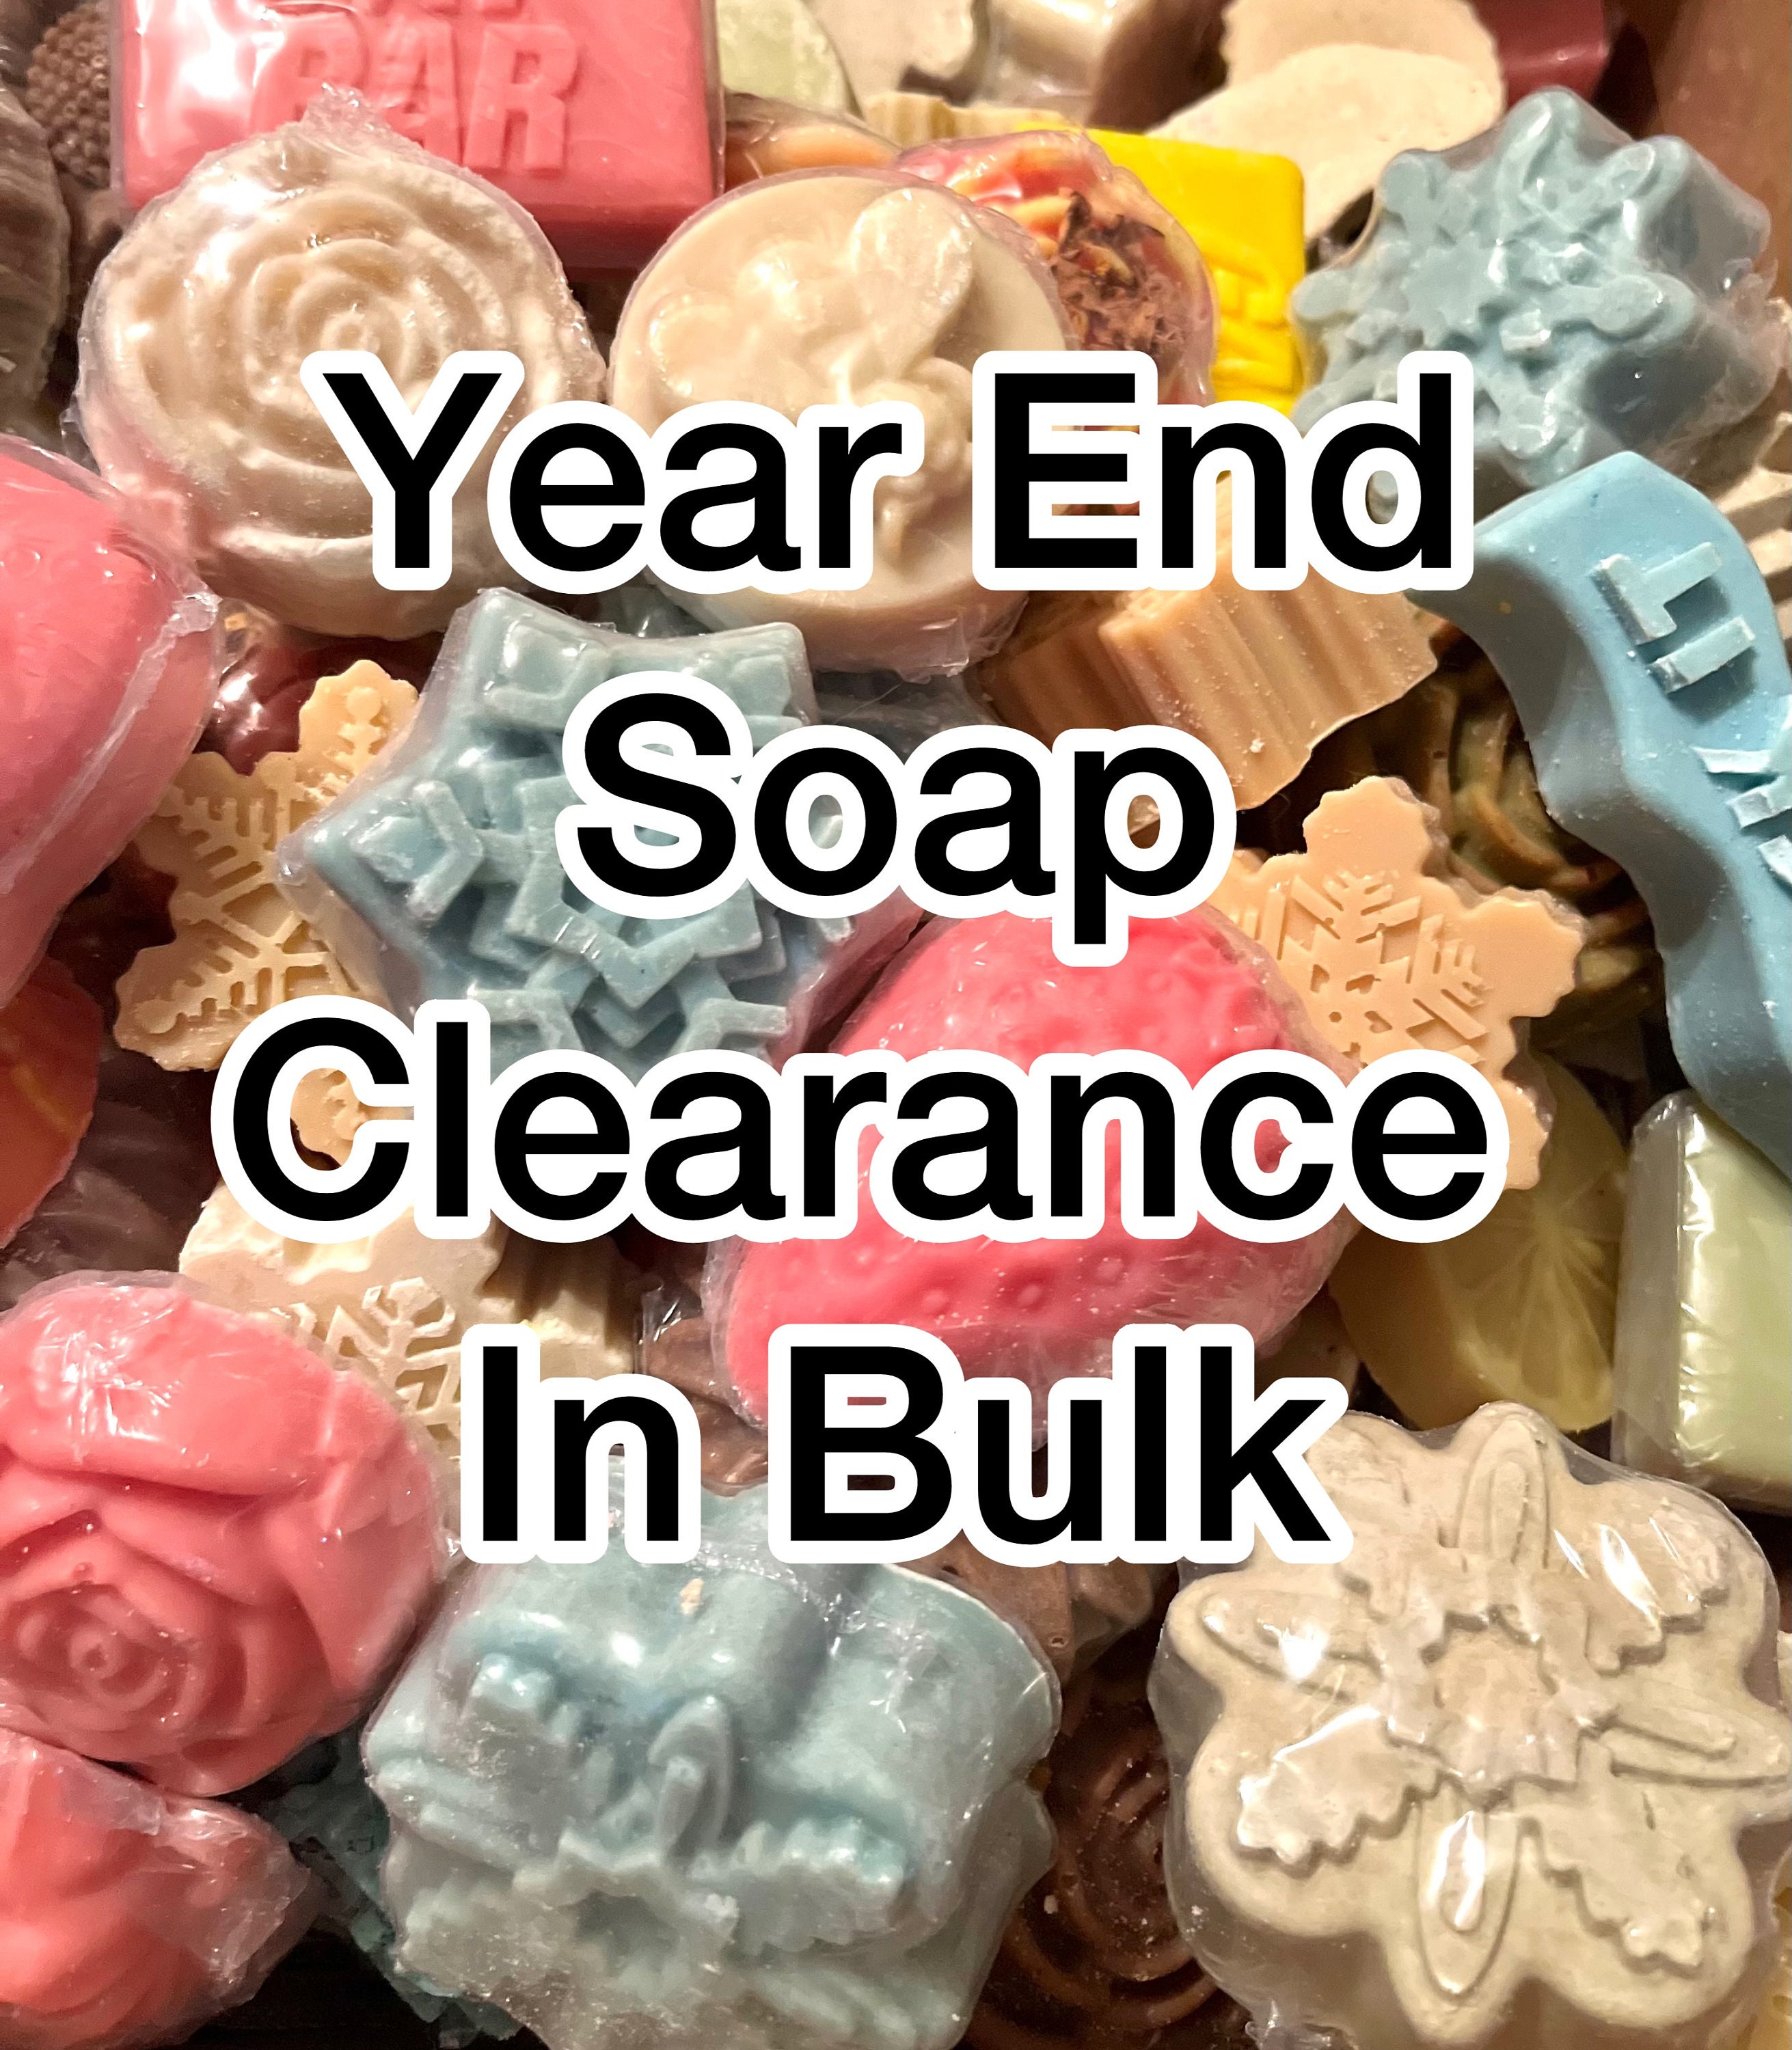 Sale Items, Discontinued Products, Clearance Seasonal Item, Seconds,  Leftover Savings, Warehouse Blowout Item On Clearance, Soap, Wax Melts